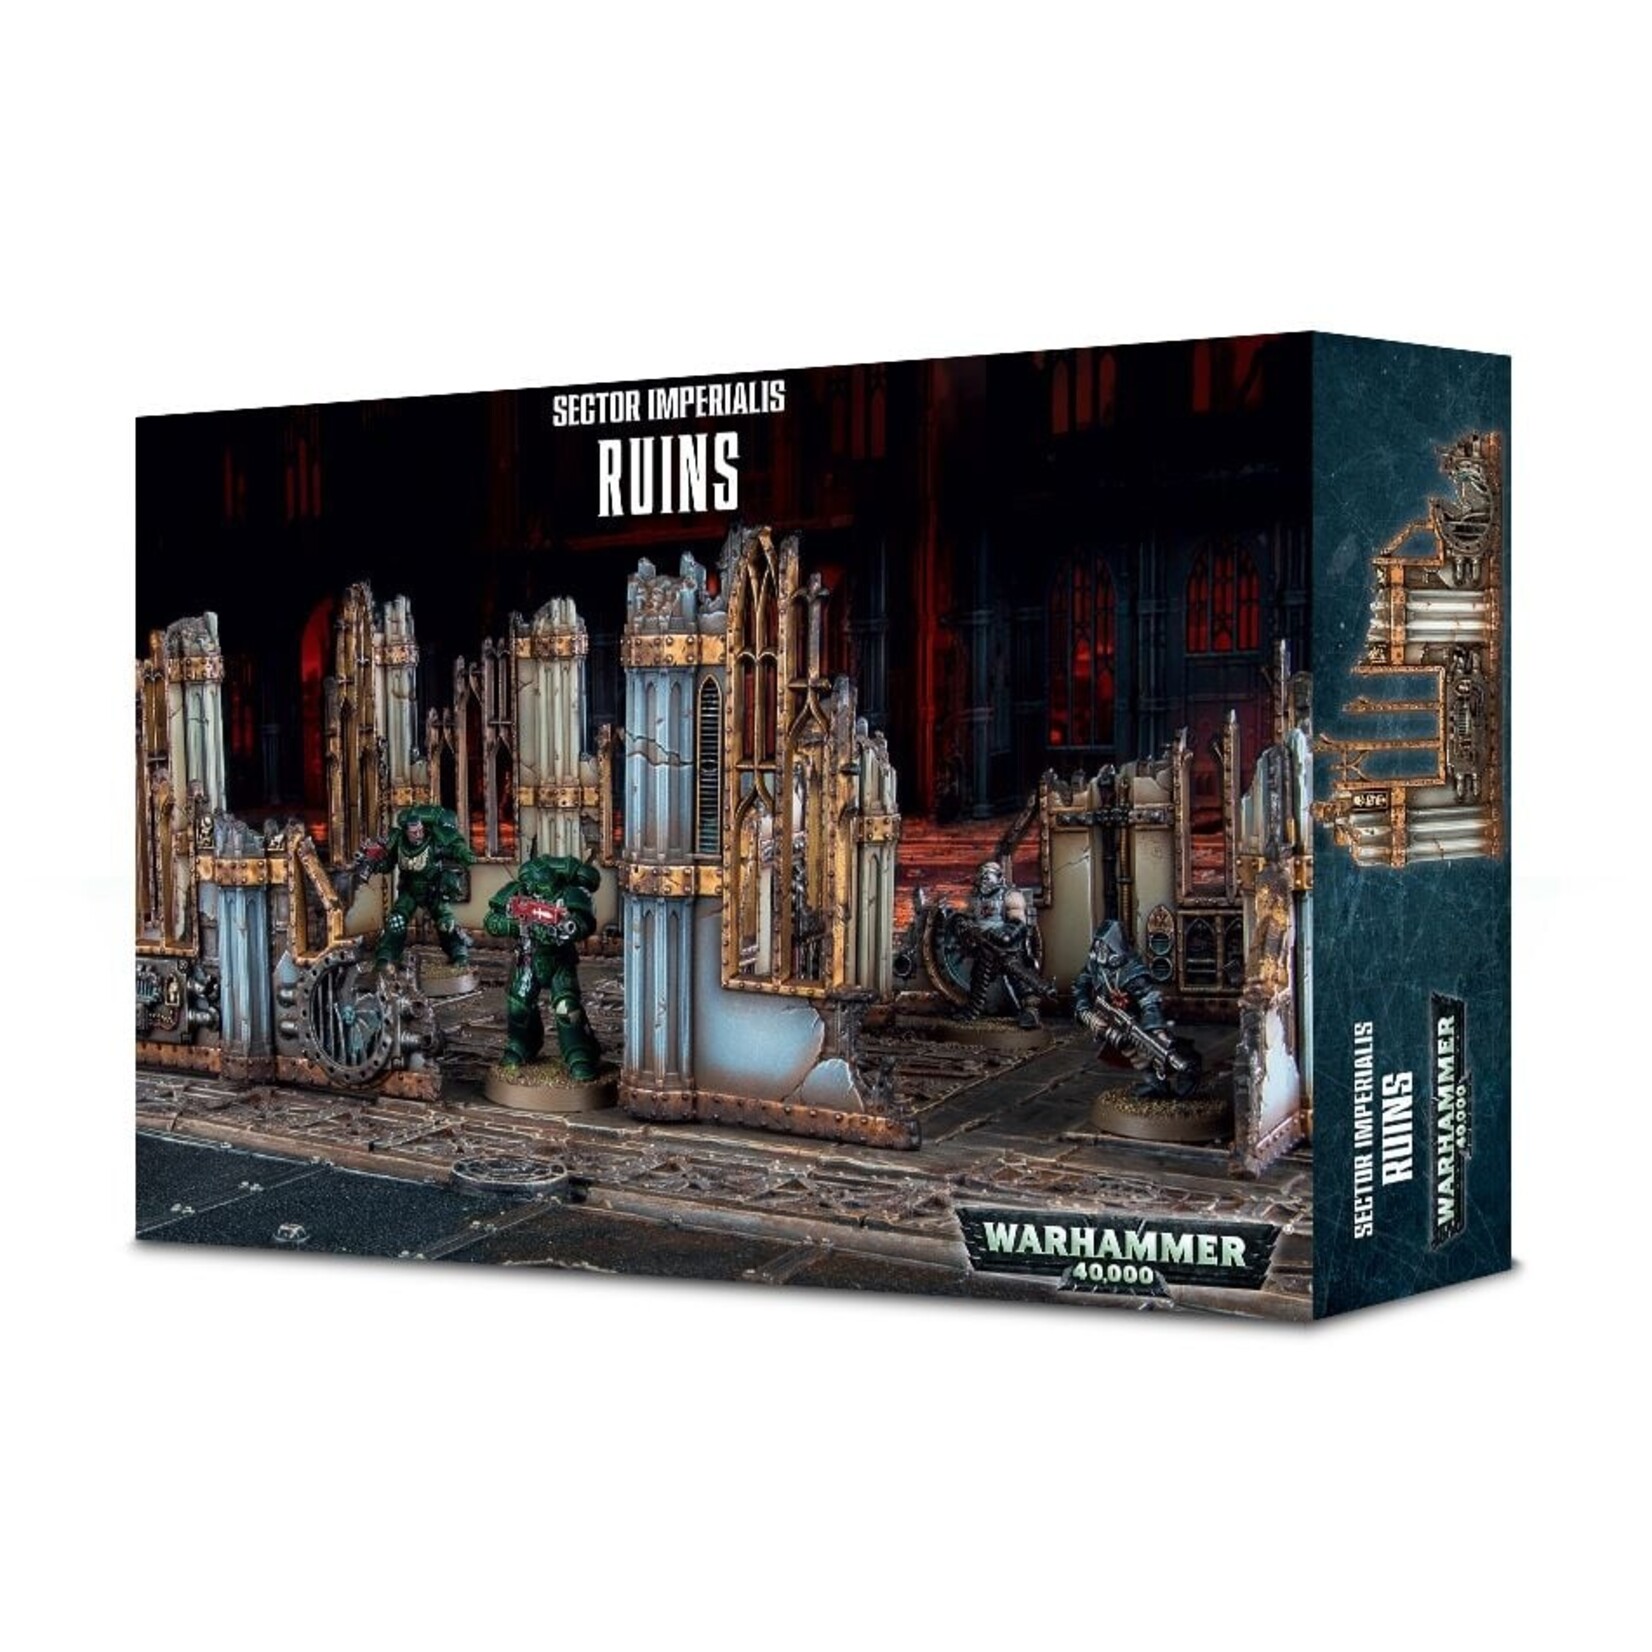 Warhammer SECTOR IMPERIALIS RUINS